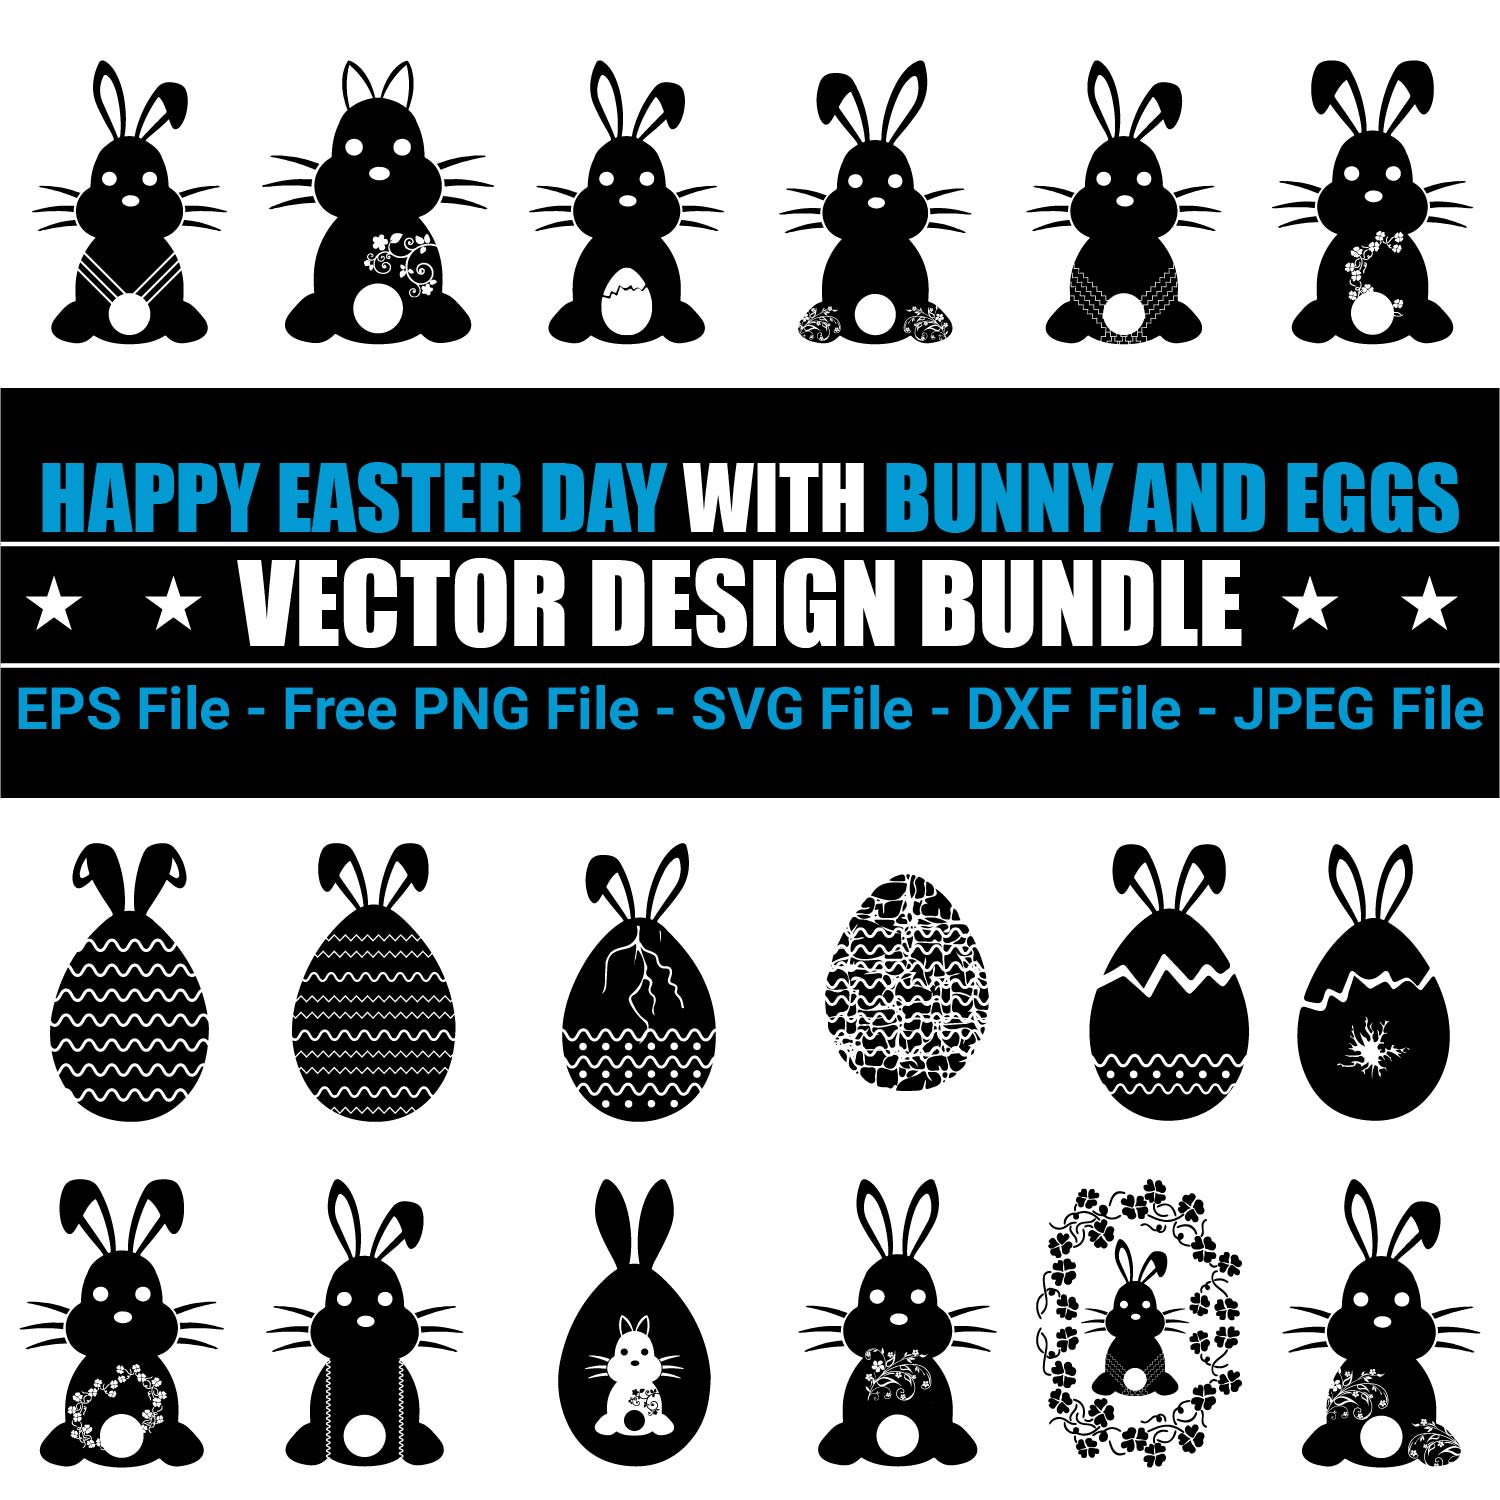 Happy Easter Day With Bunny And Eggs Design Bundle.